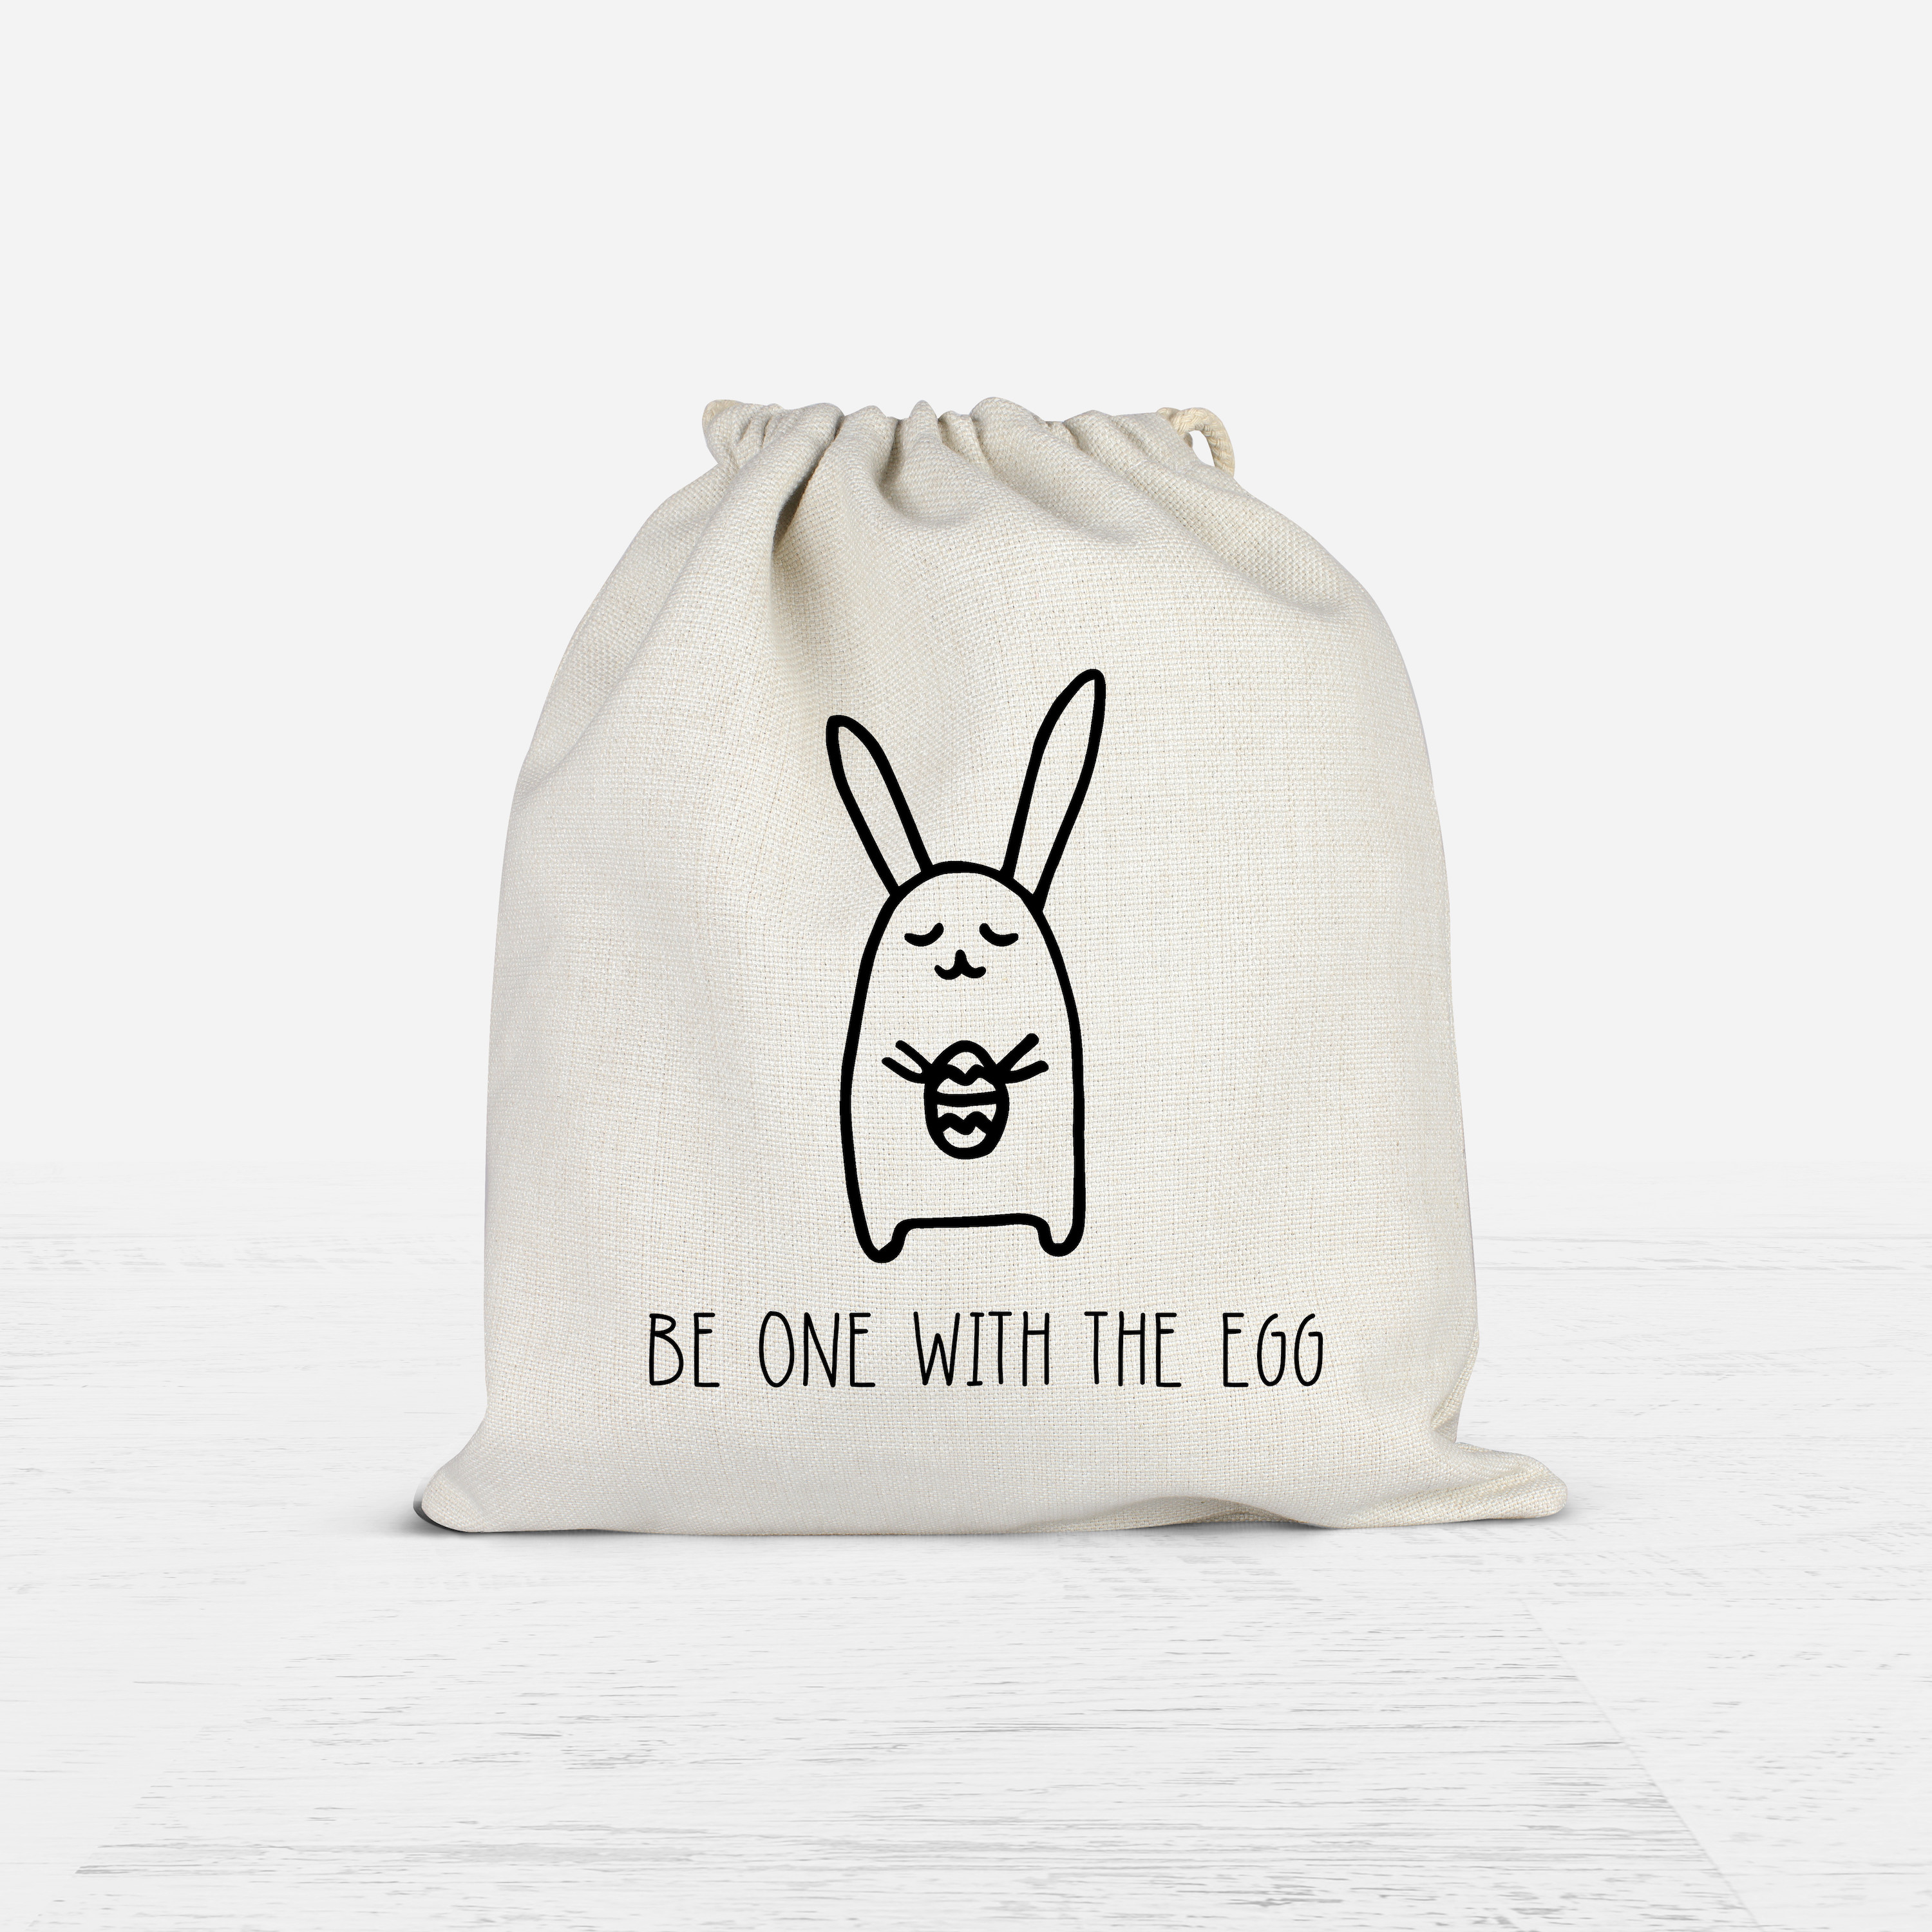 Easter Egg Hunt Sacks created by Nikita Camacho for Hearts in Her Shoes